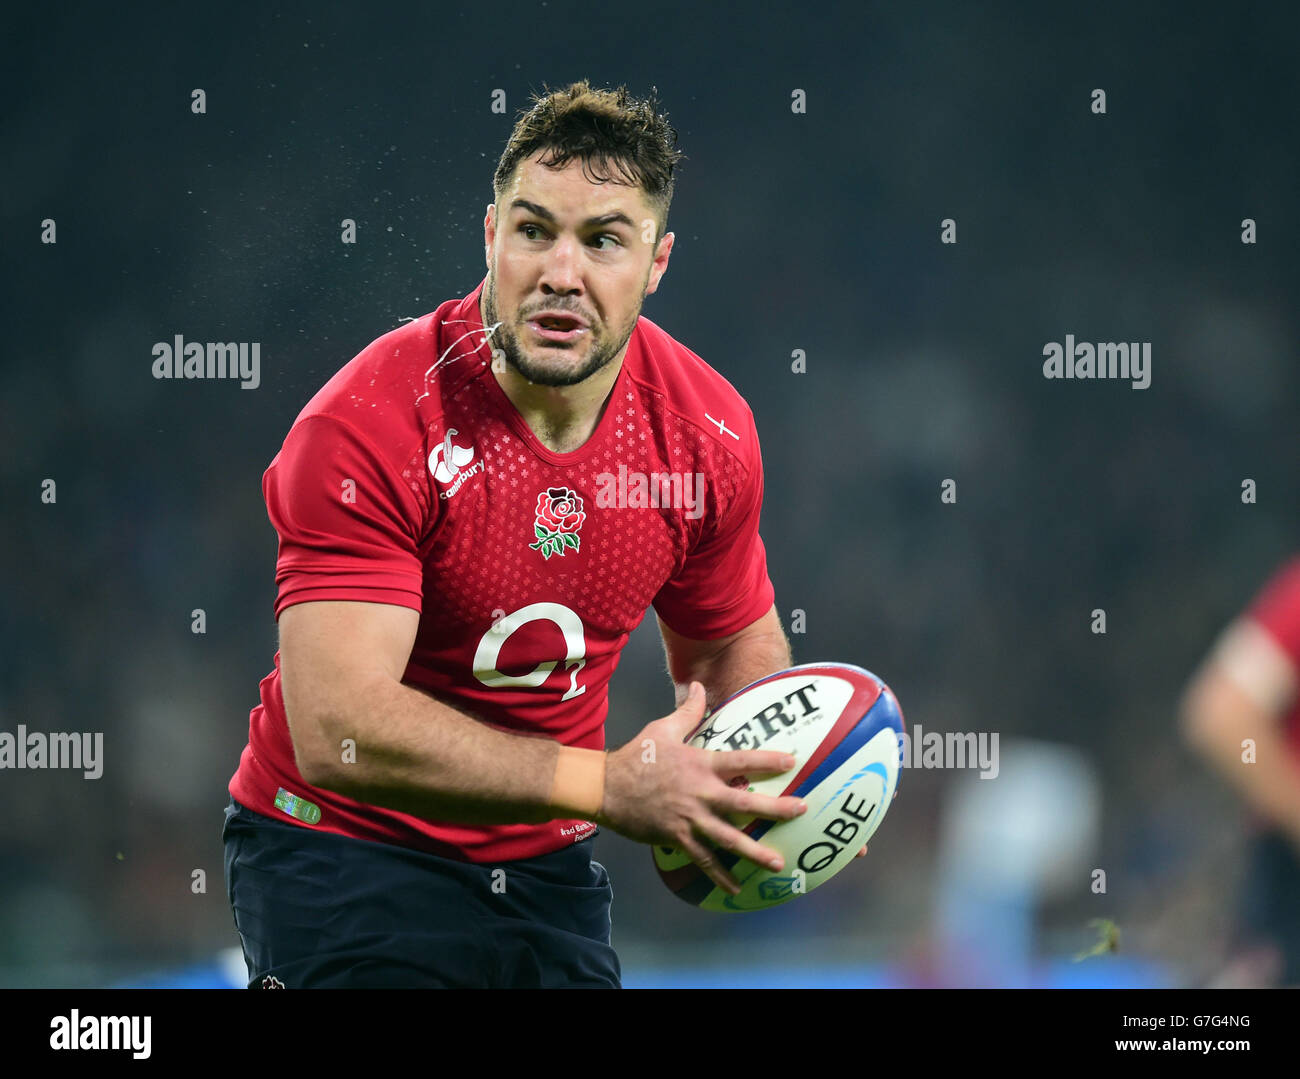 England's Brad Barritt during the QBE International match at Twickenham, London. PRESS ASSOCIATION Photo. Picture date: Saturday November 22, 2014. See PA Story RUGBYU England. Photo credit should read: Adam Davy/PA Wire. Stock Photo